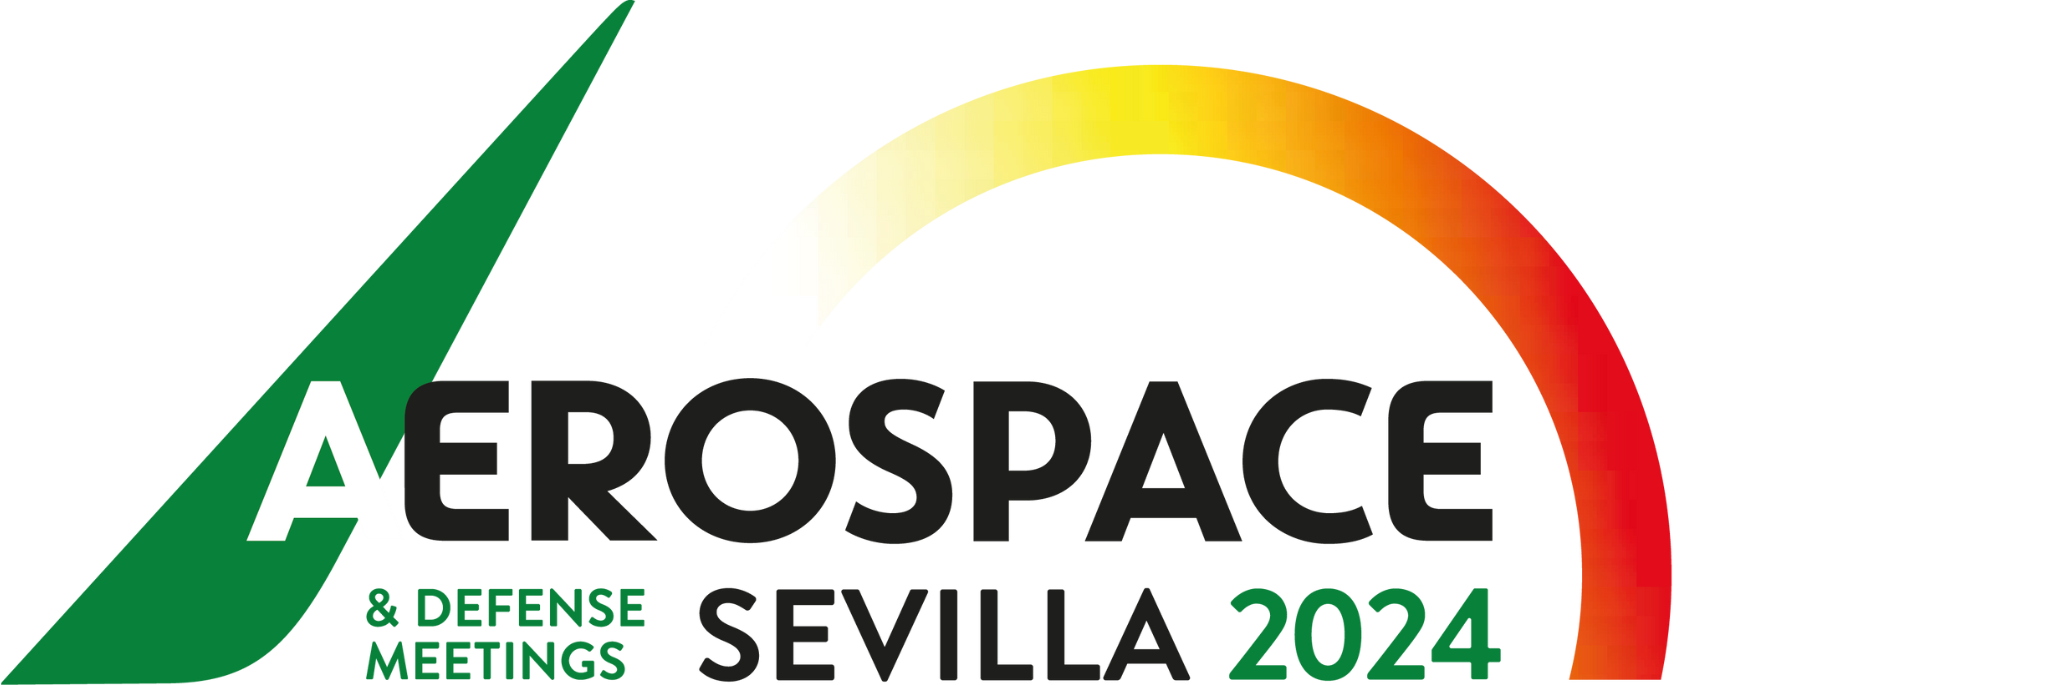 Aerospace & Defense Meetings-ADM Sevilla 2024 has 205 registered companies from 24 countries, more than a month before its celebration